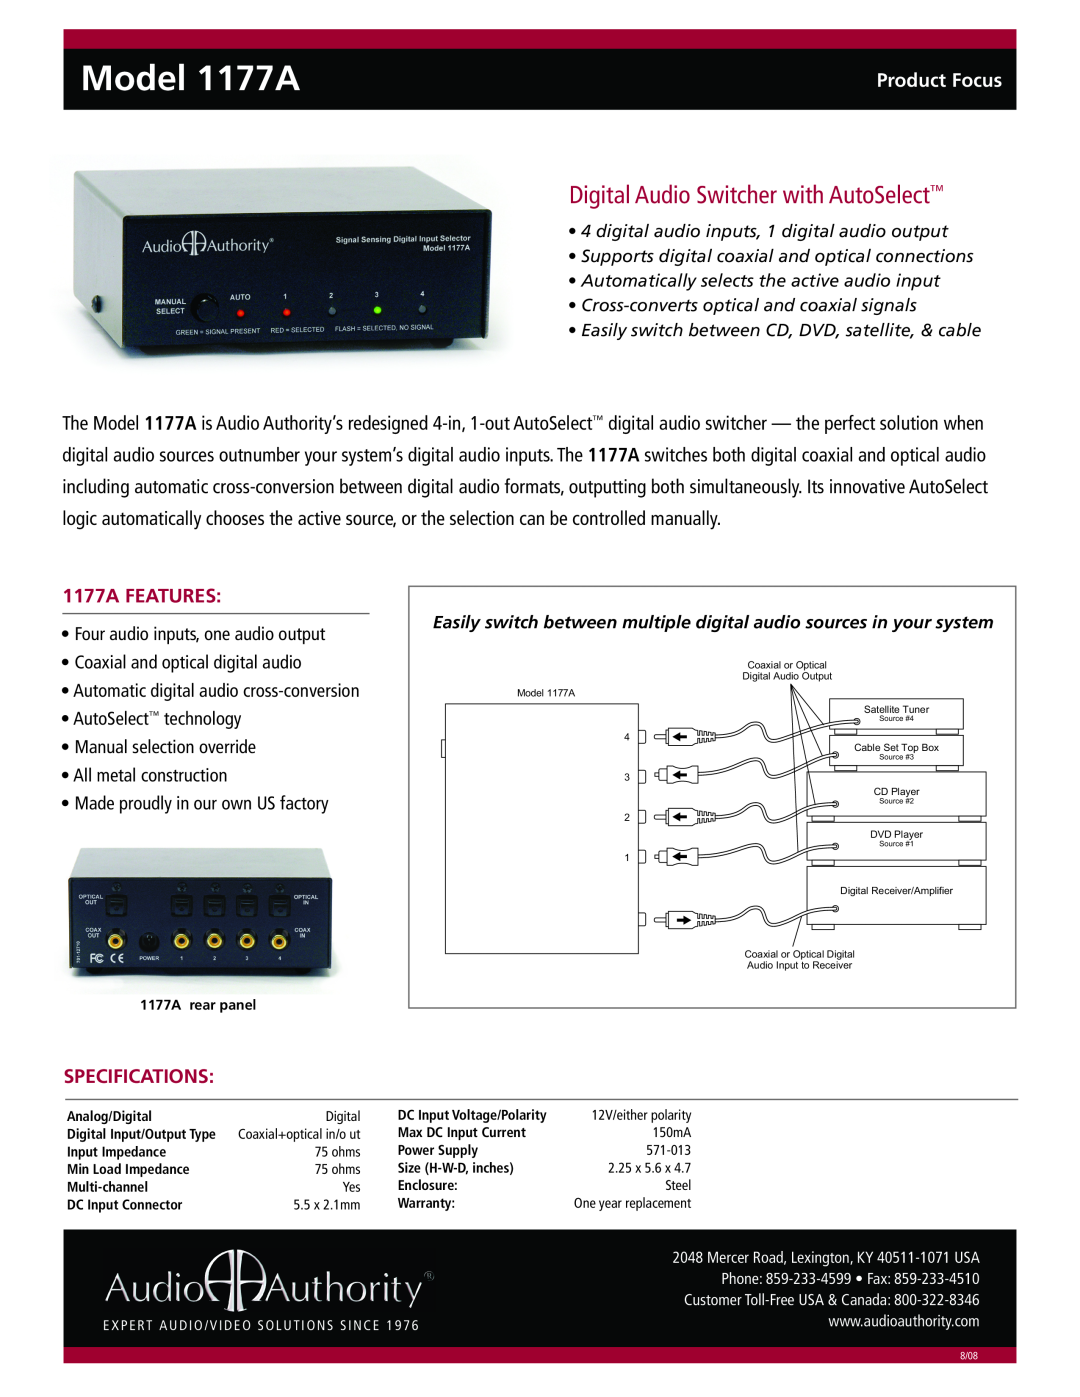 Audio Authority specifications Model 1177A, Digital Audio Switcher with AutoSelect, Product Focus, 1177A FEATURES 